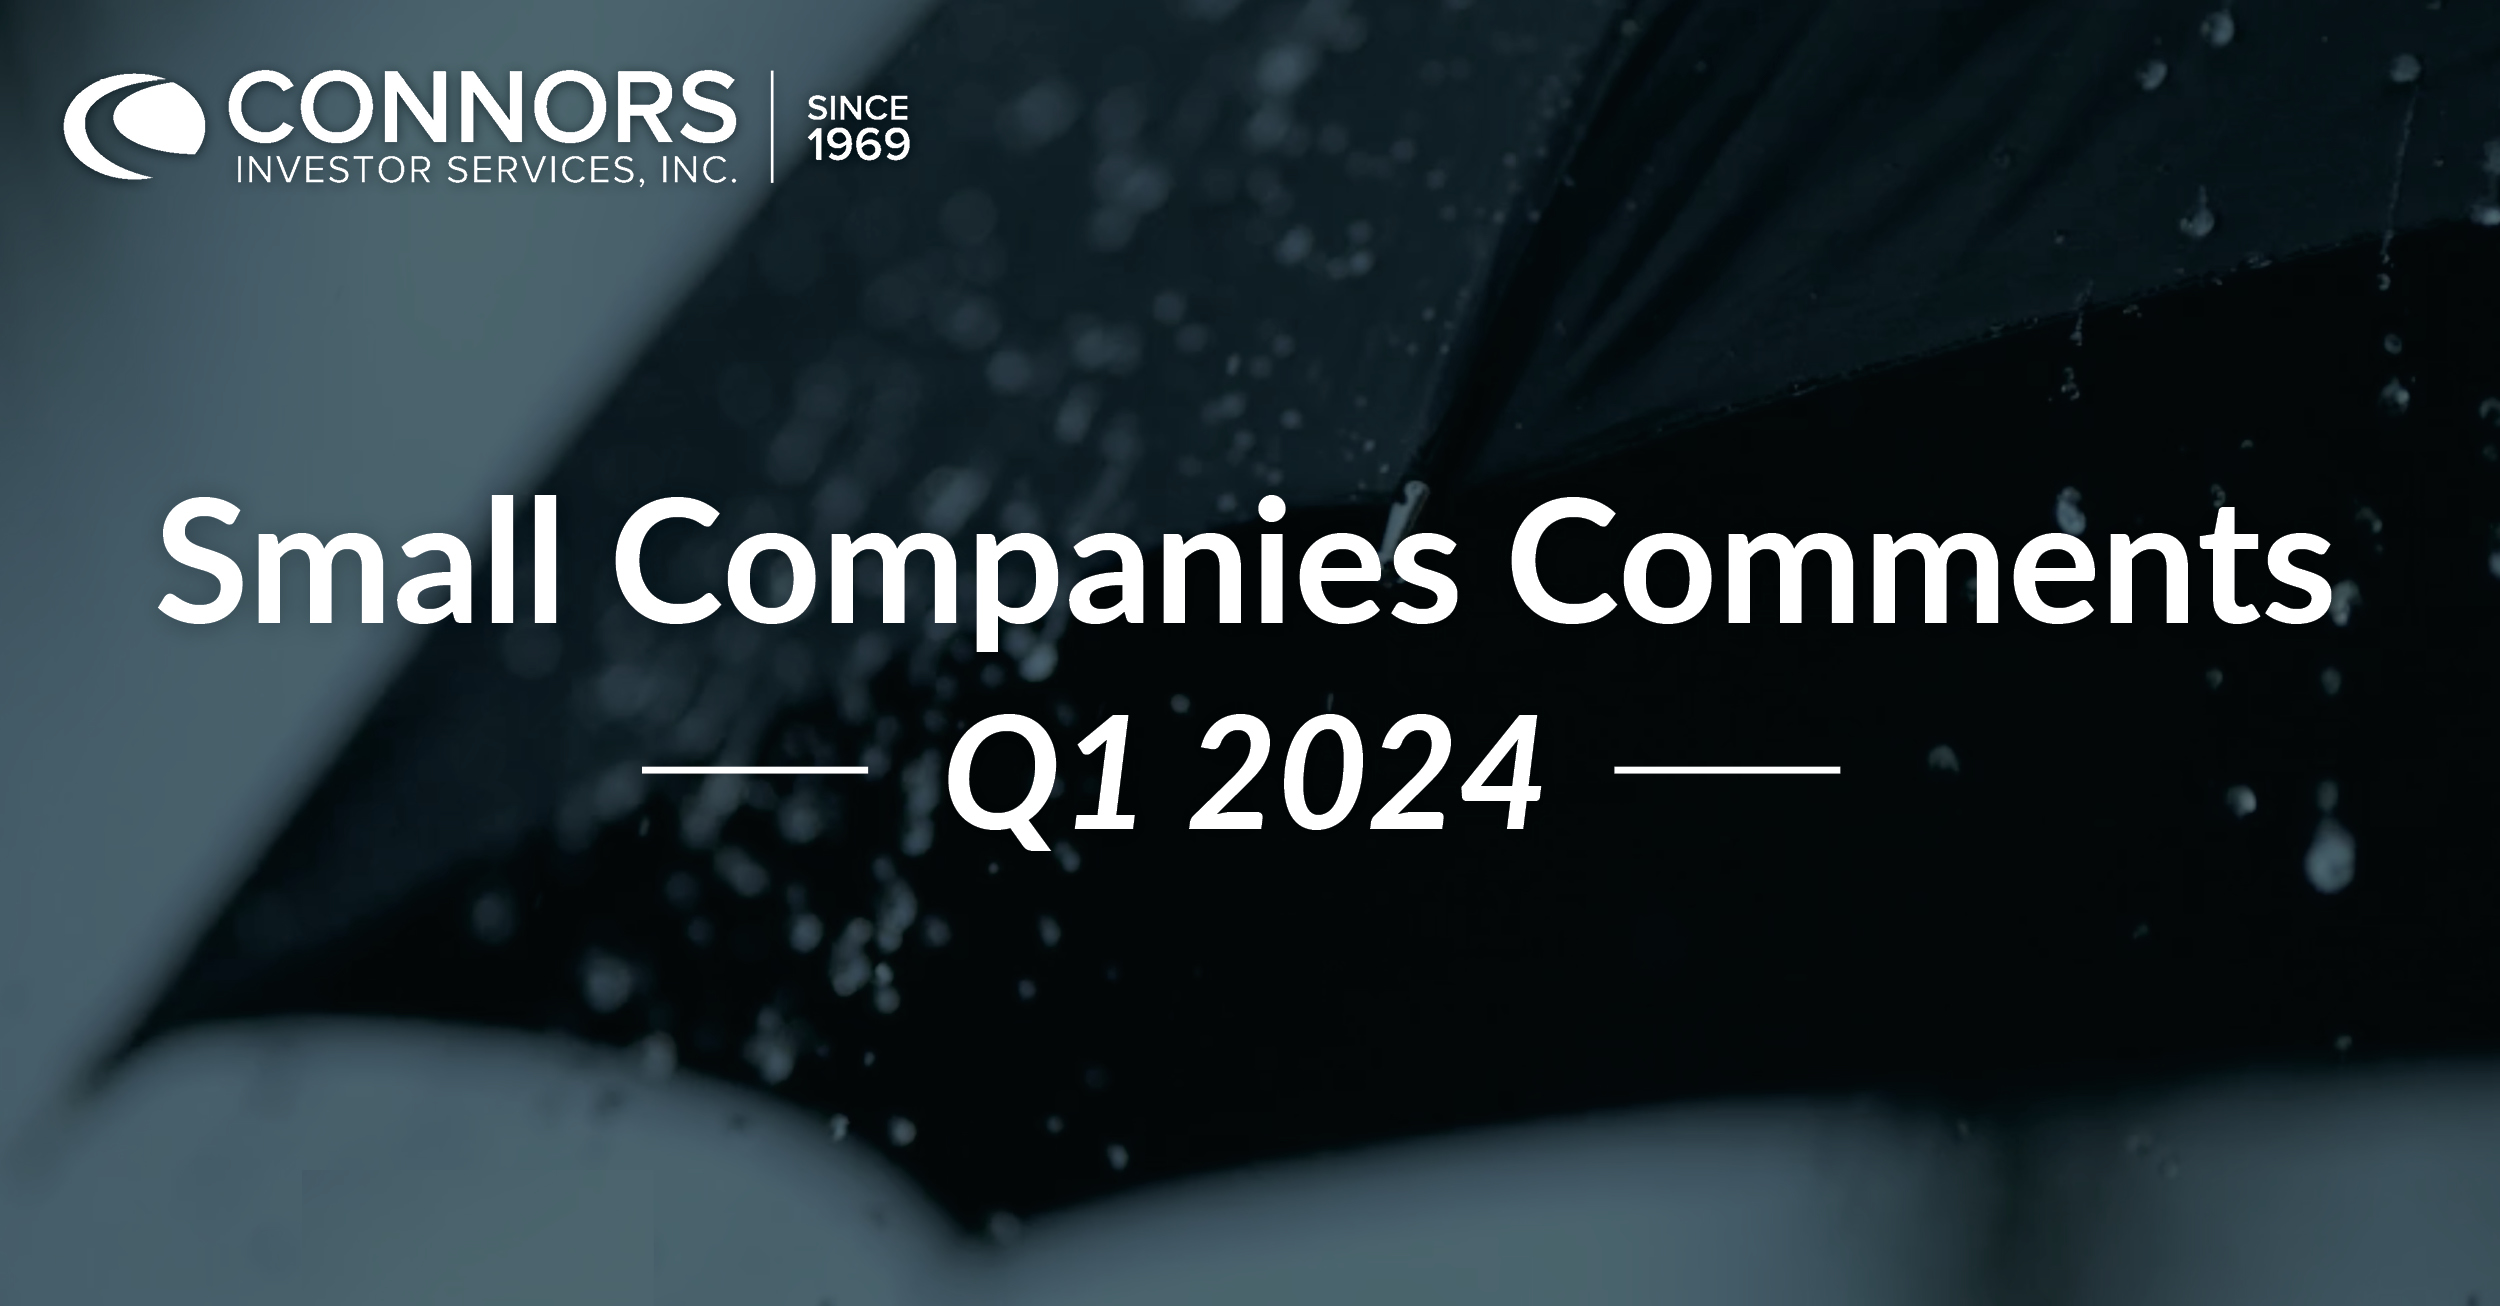 Q1 2024 Small Companies Comments